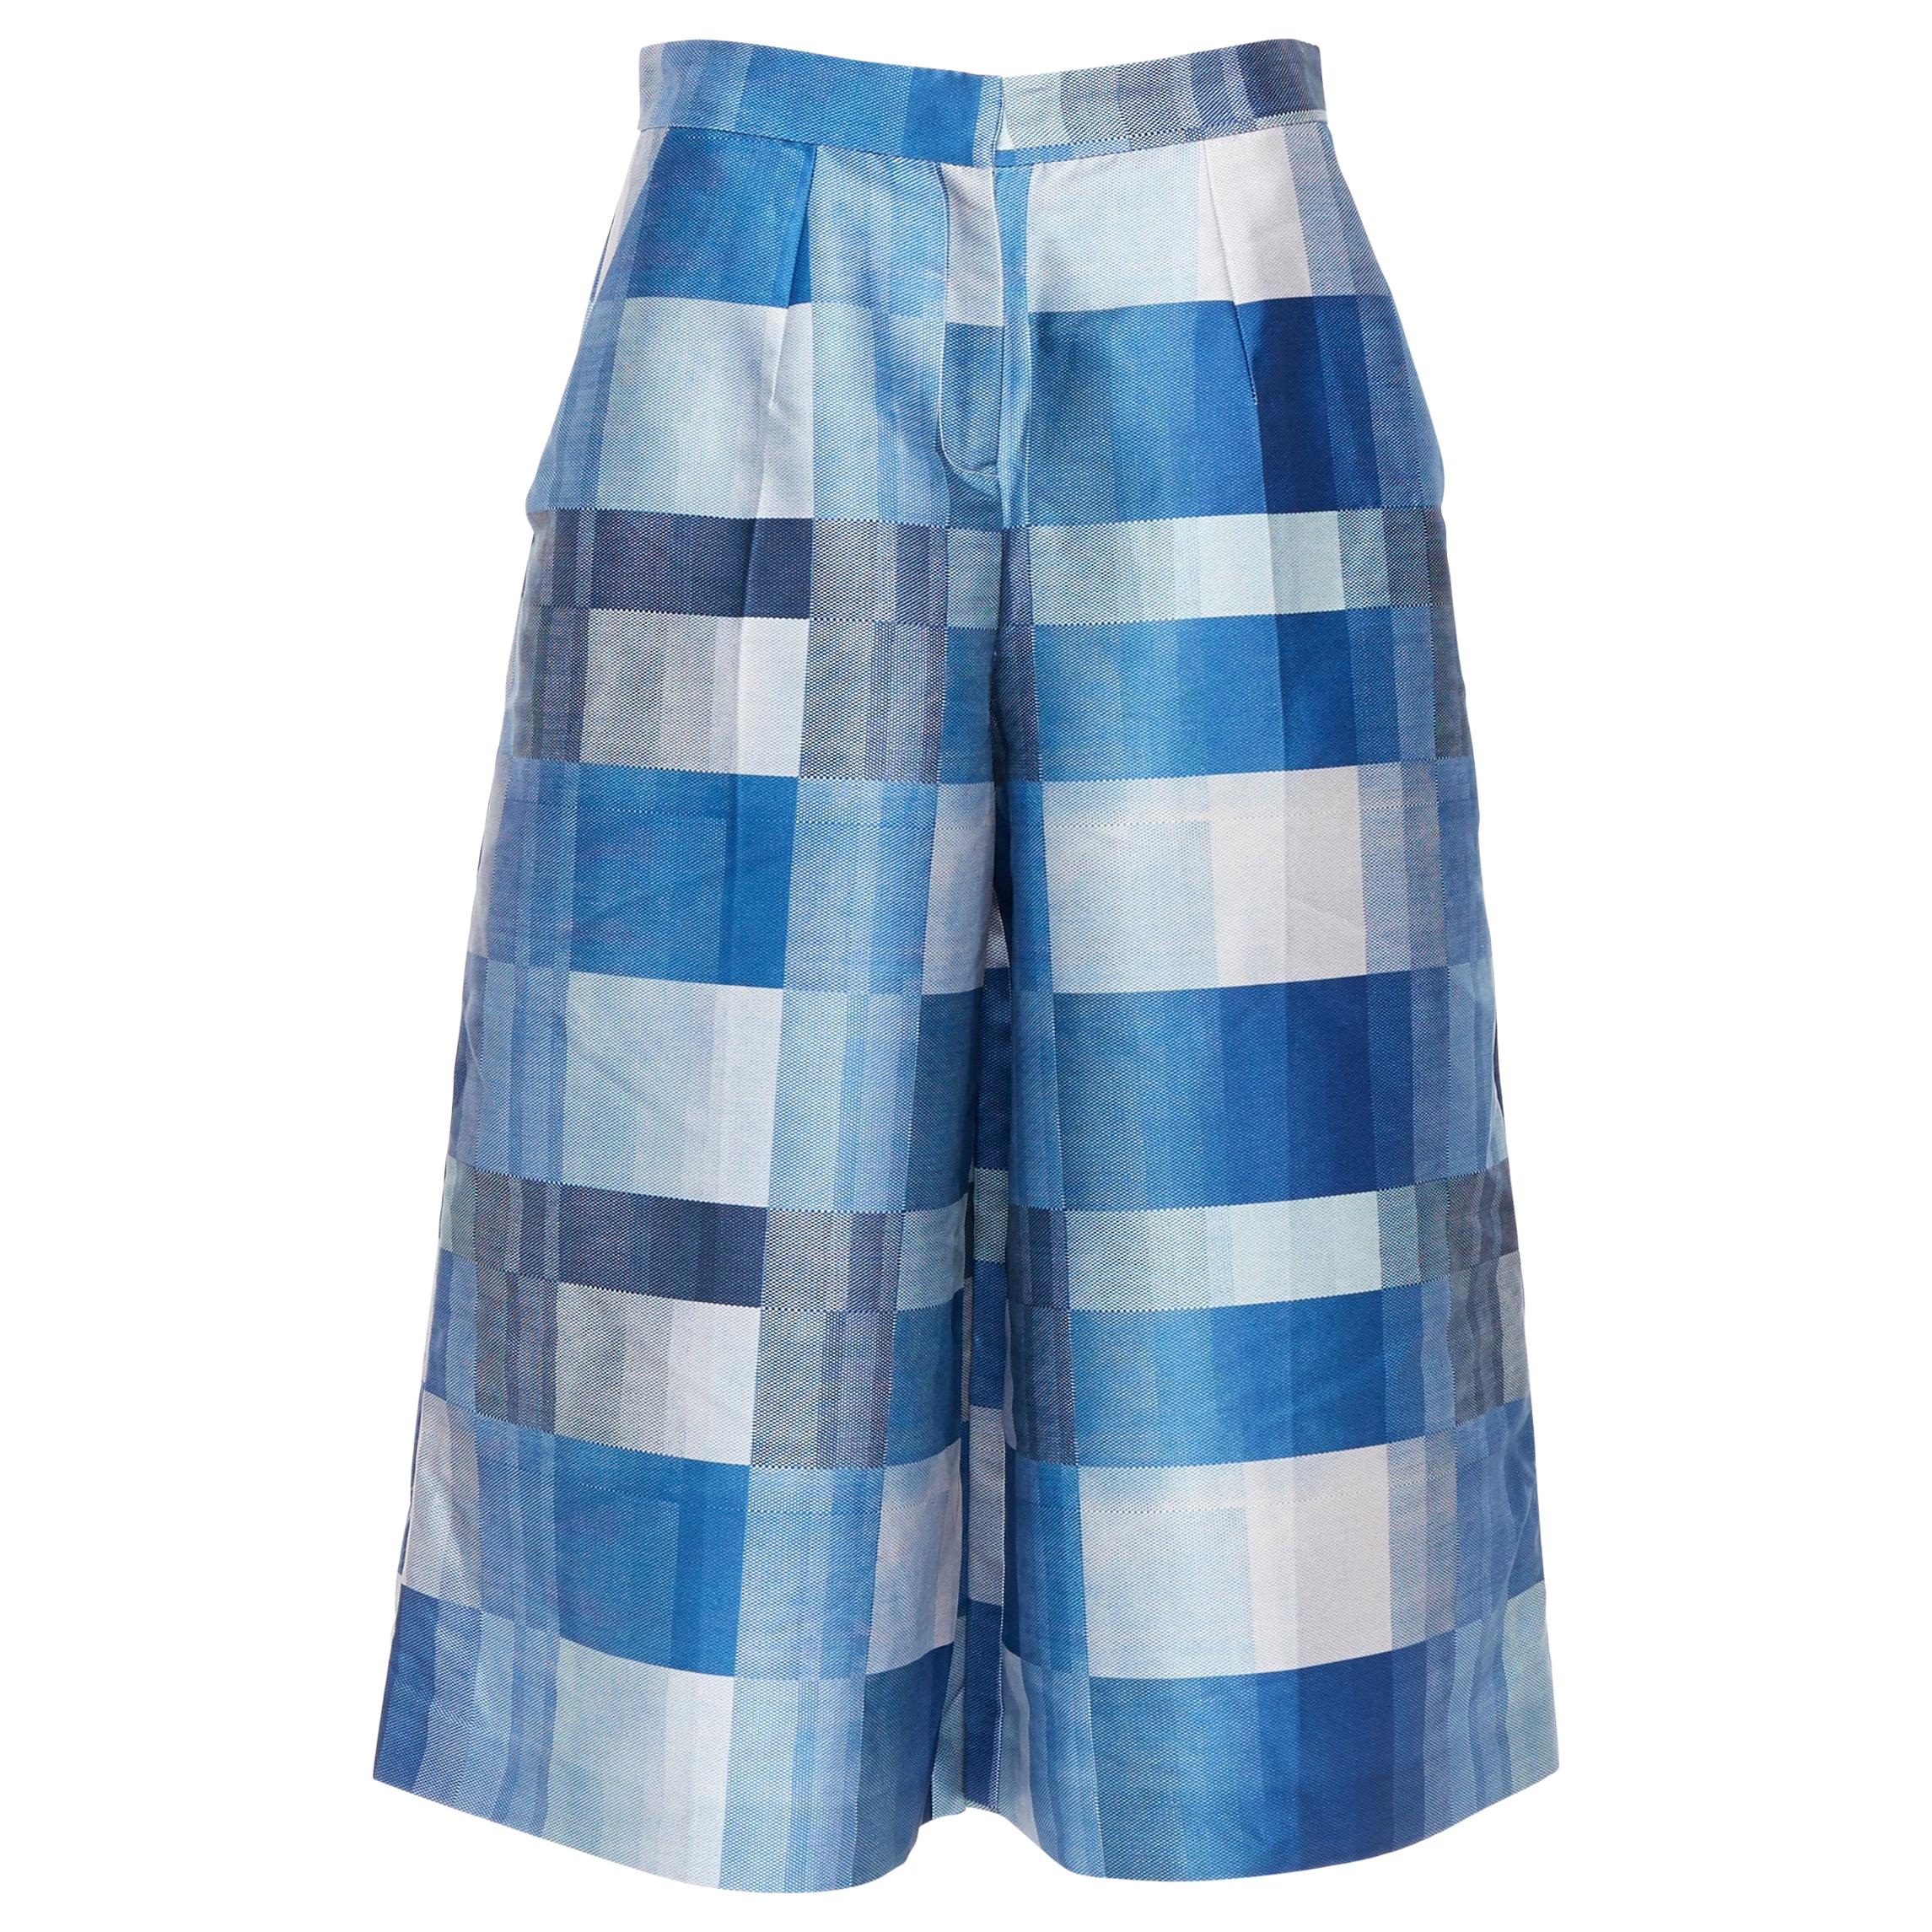 WHISTLES multi-sahde blue patchwork print wide leg flared culotte shorts US8